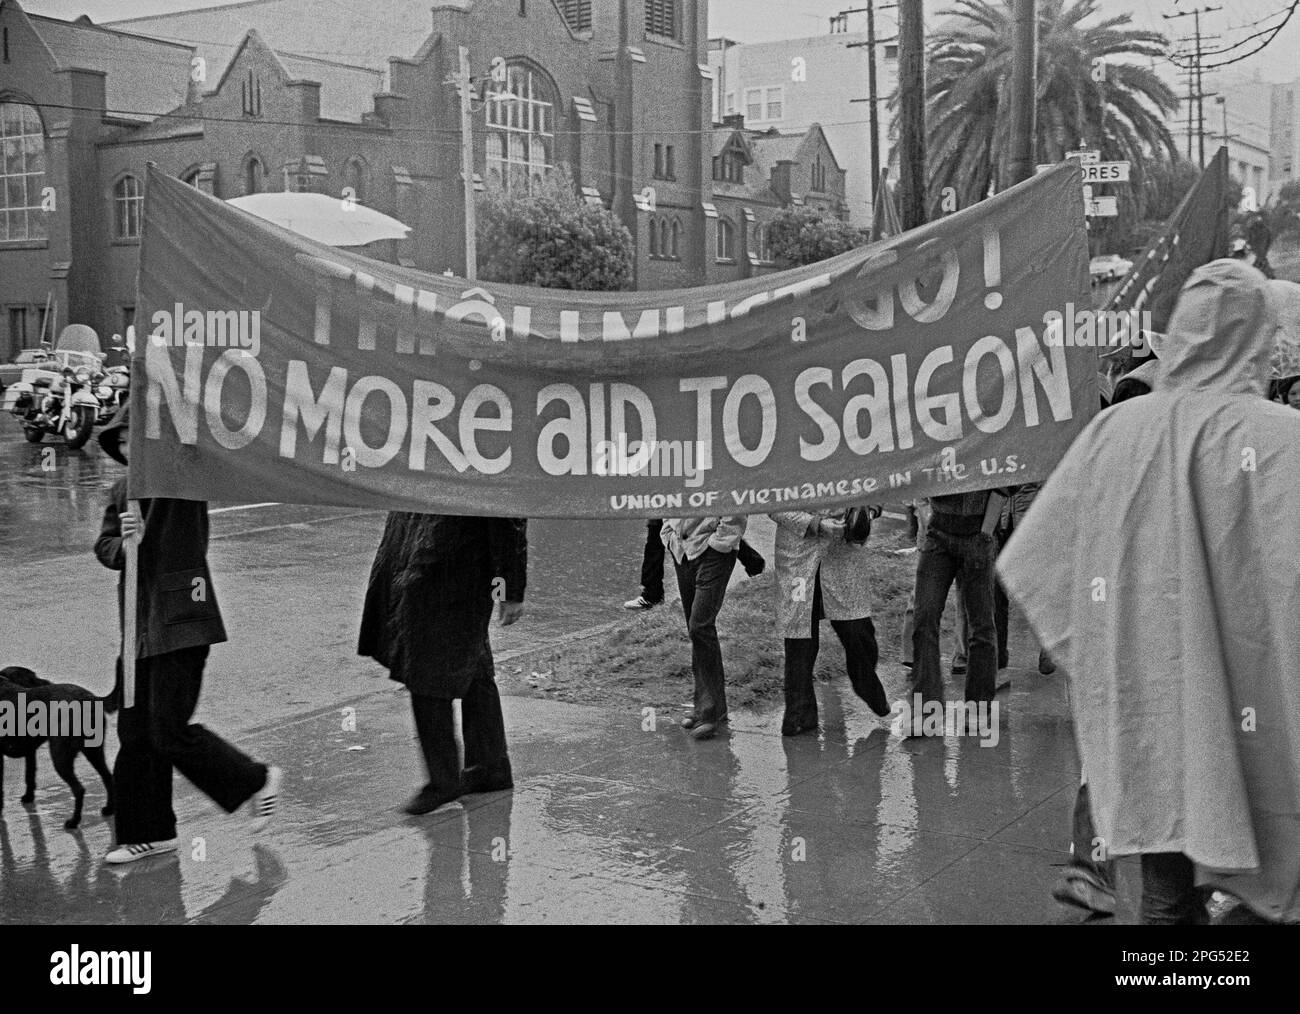 Thieu must go, no more aid to Saigon banner  carried by Vietnam War protesters in San Francisco, California, in 1975 Stock Photo